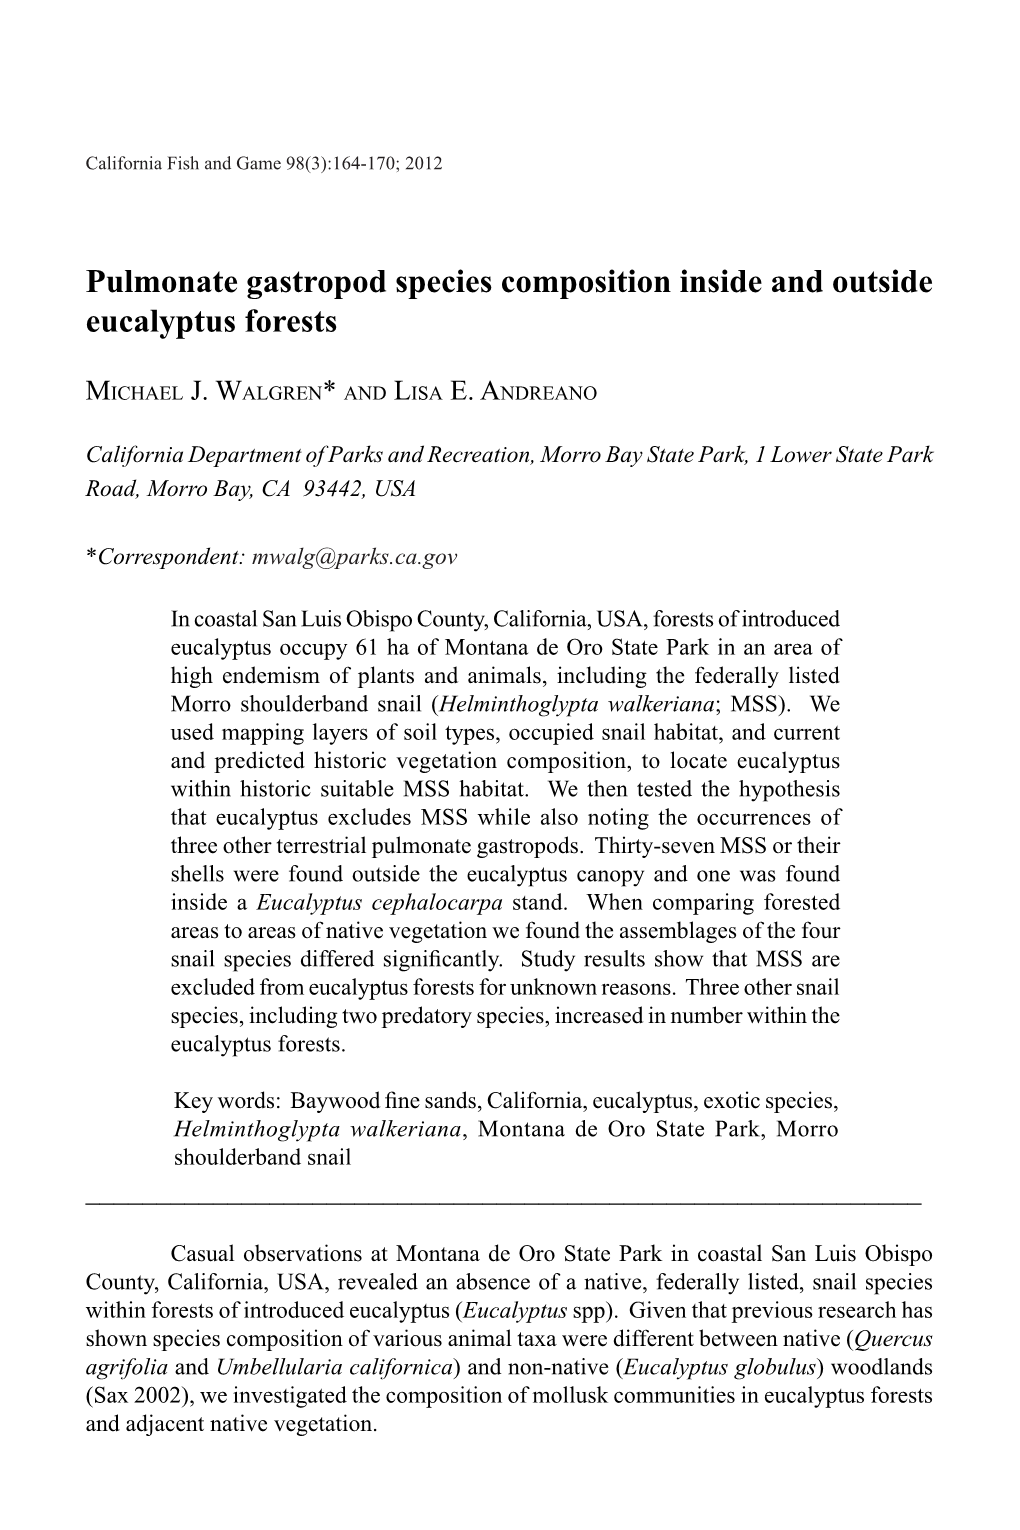 Pulmonate Gastropod Species Composition Inside and Outside Eucalyptus Forests